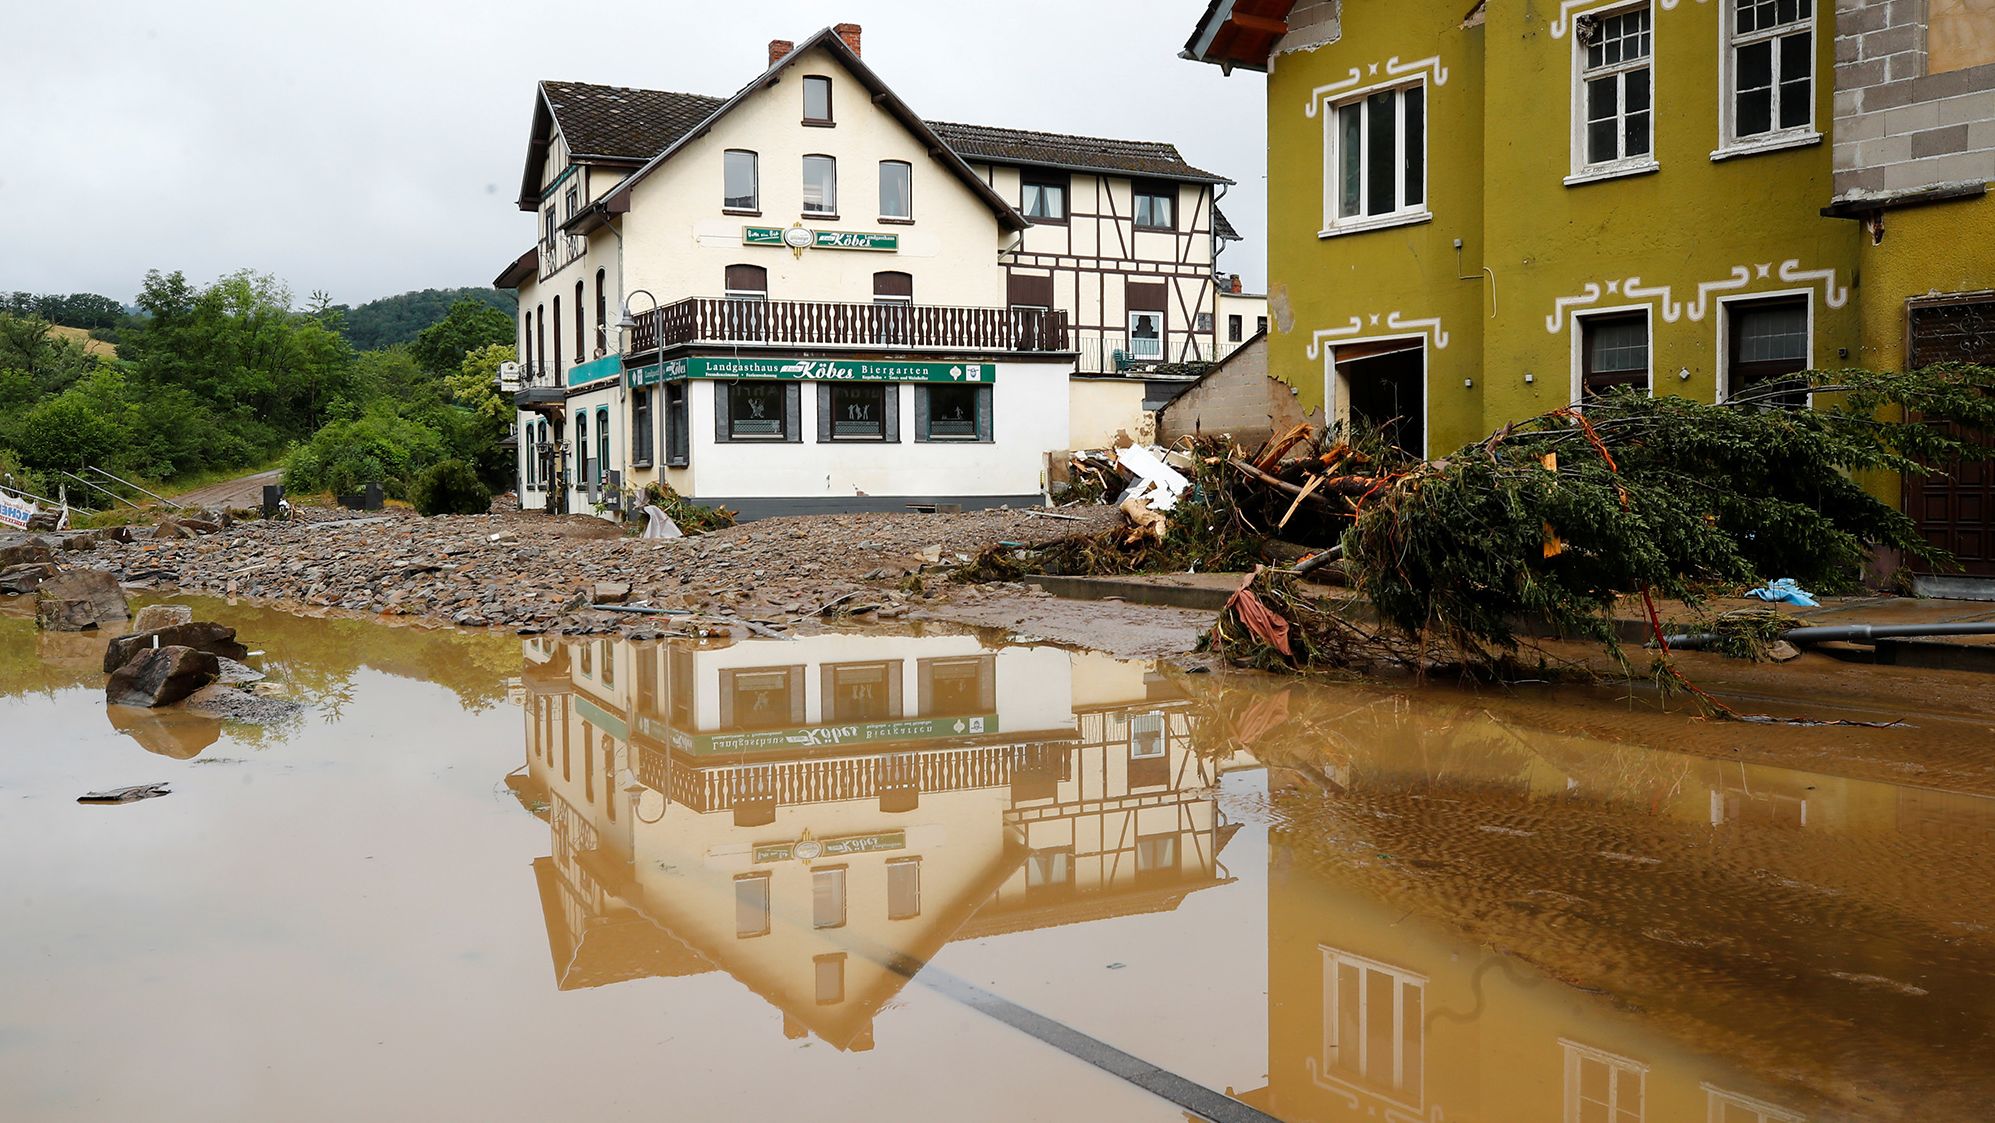 A flood-affected area of Schuld, Germany.